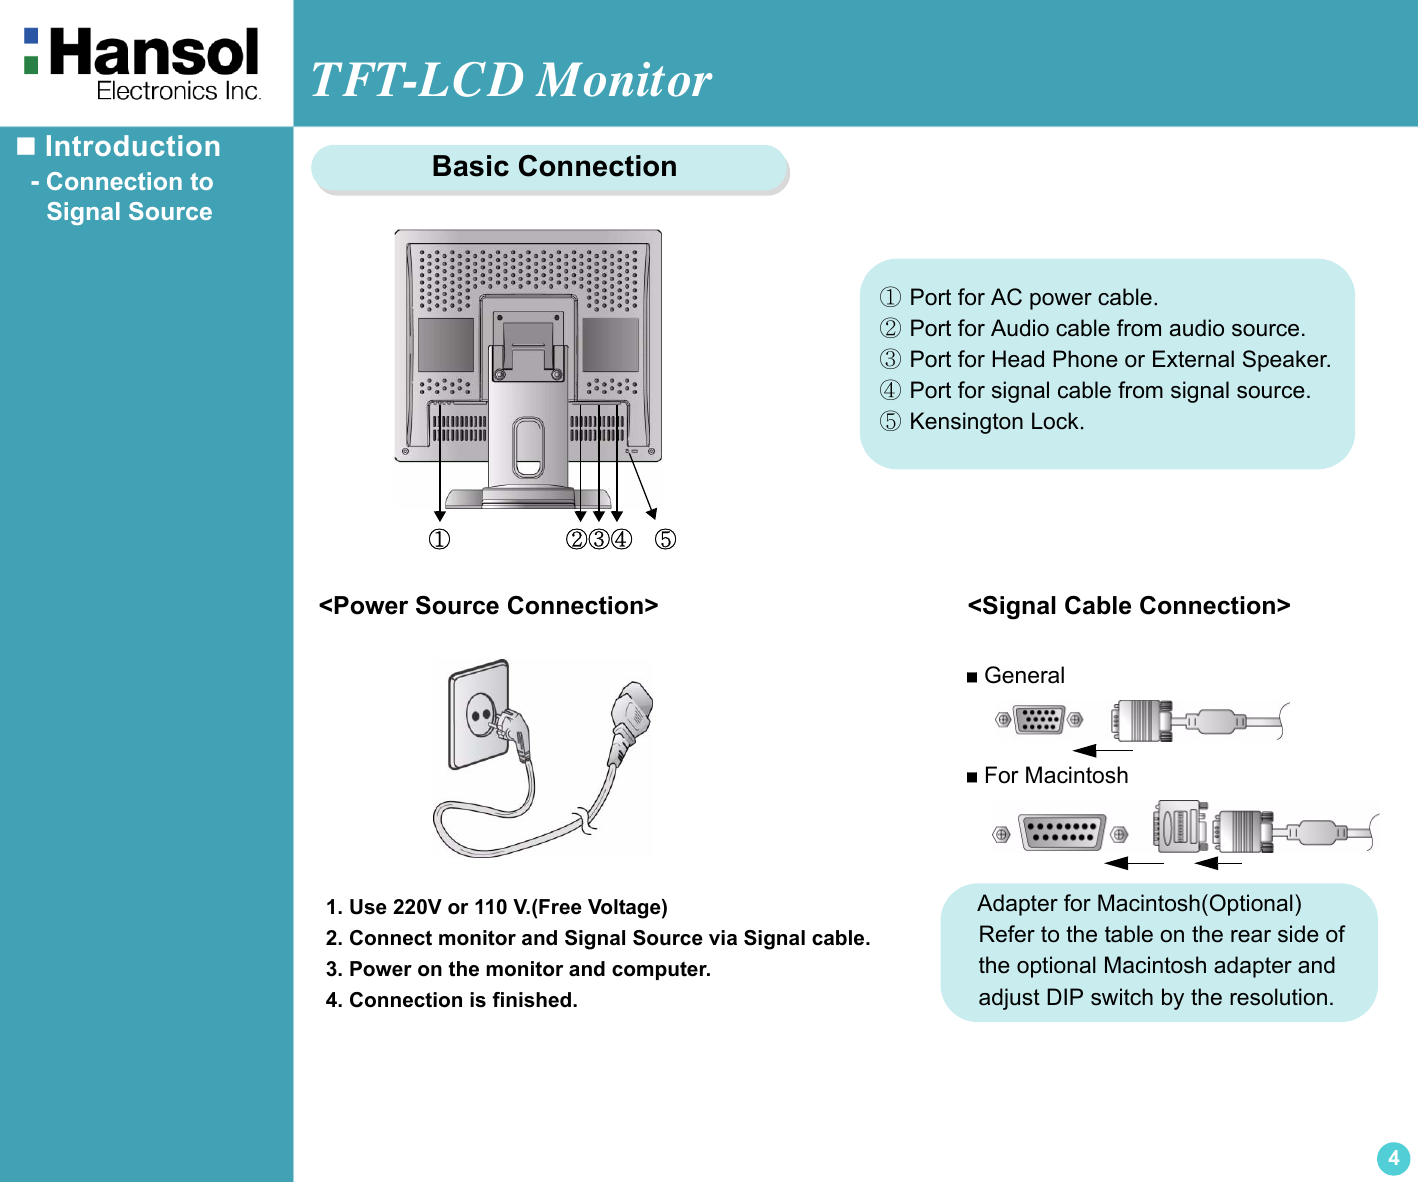 TFT-LCD Monitor4 Introduction  - Connection to     Signal Source &lt;Power Source Connection&gt;                                     &lt;Signal Cable Connection&gt;①① Port for AC power cable.② Port for Audio cable from audio source.③ Port for Head Phone or External Speaker.④ Port for signal cable from signal source.⑤ Kensington Lock.②③④    ⑤ General For Macintosh    Adapter for Macintosh(Optional)     Refer to the table on the rear side of      the optional Macintosh adapter and      adjust DIP switch by the resolution.1. Use 220V or 110 V.(Free Voltage)2. Connect monitor and Signal Source via Signal cable.3. Power on the monitor and computer.4. Connection is finished.           Basic Connection